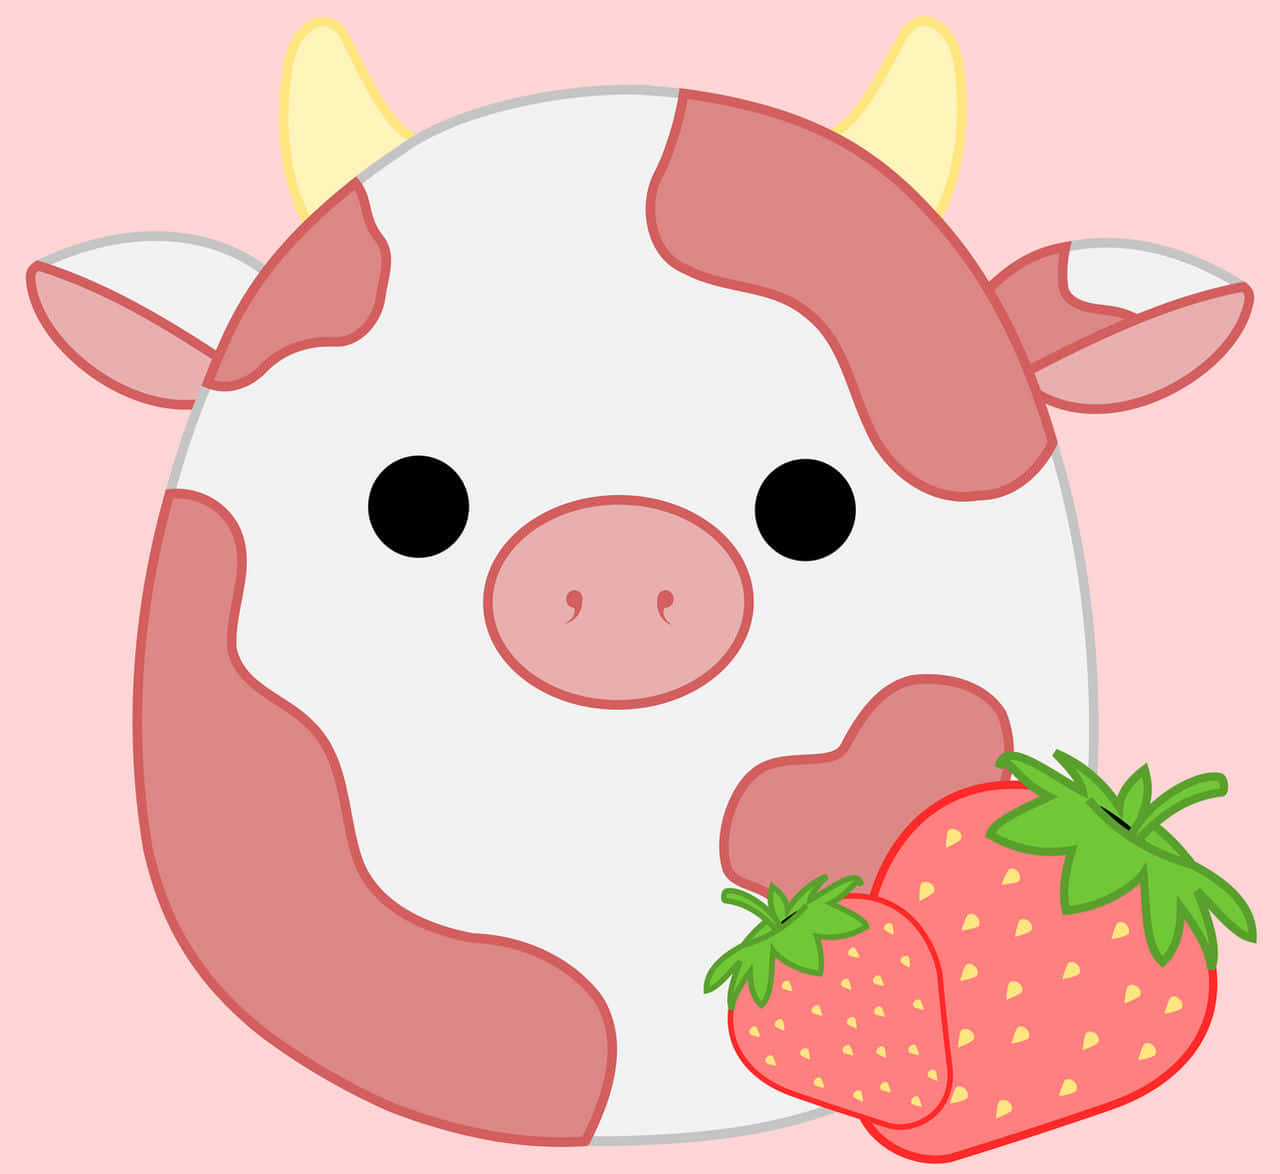 Strawberry Cow Fabric Wallpaper and Home Decor  Spoonflower